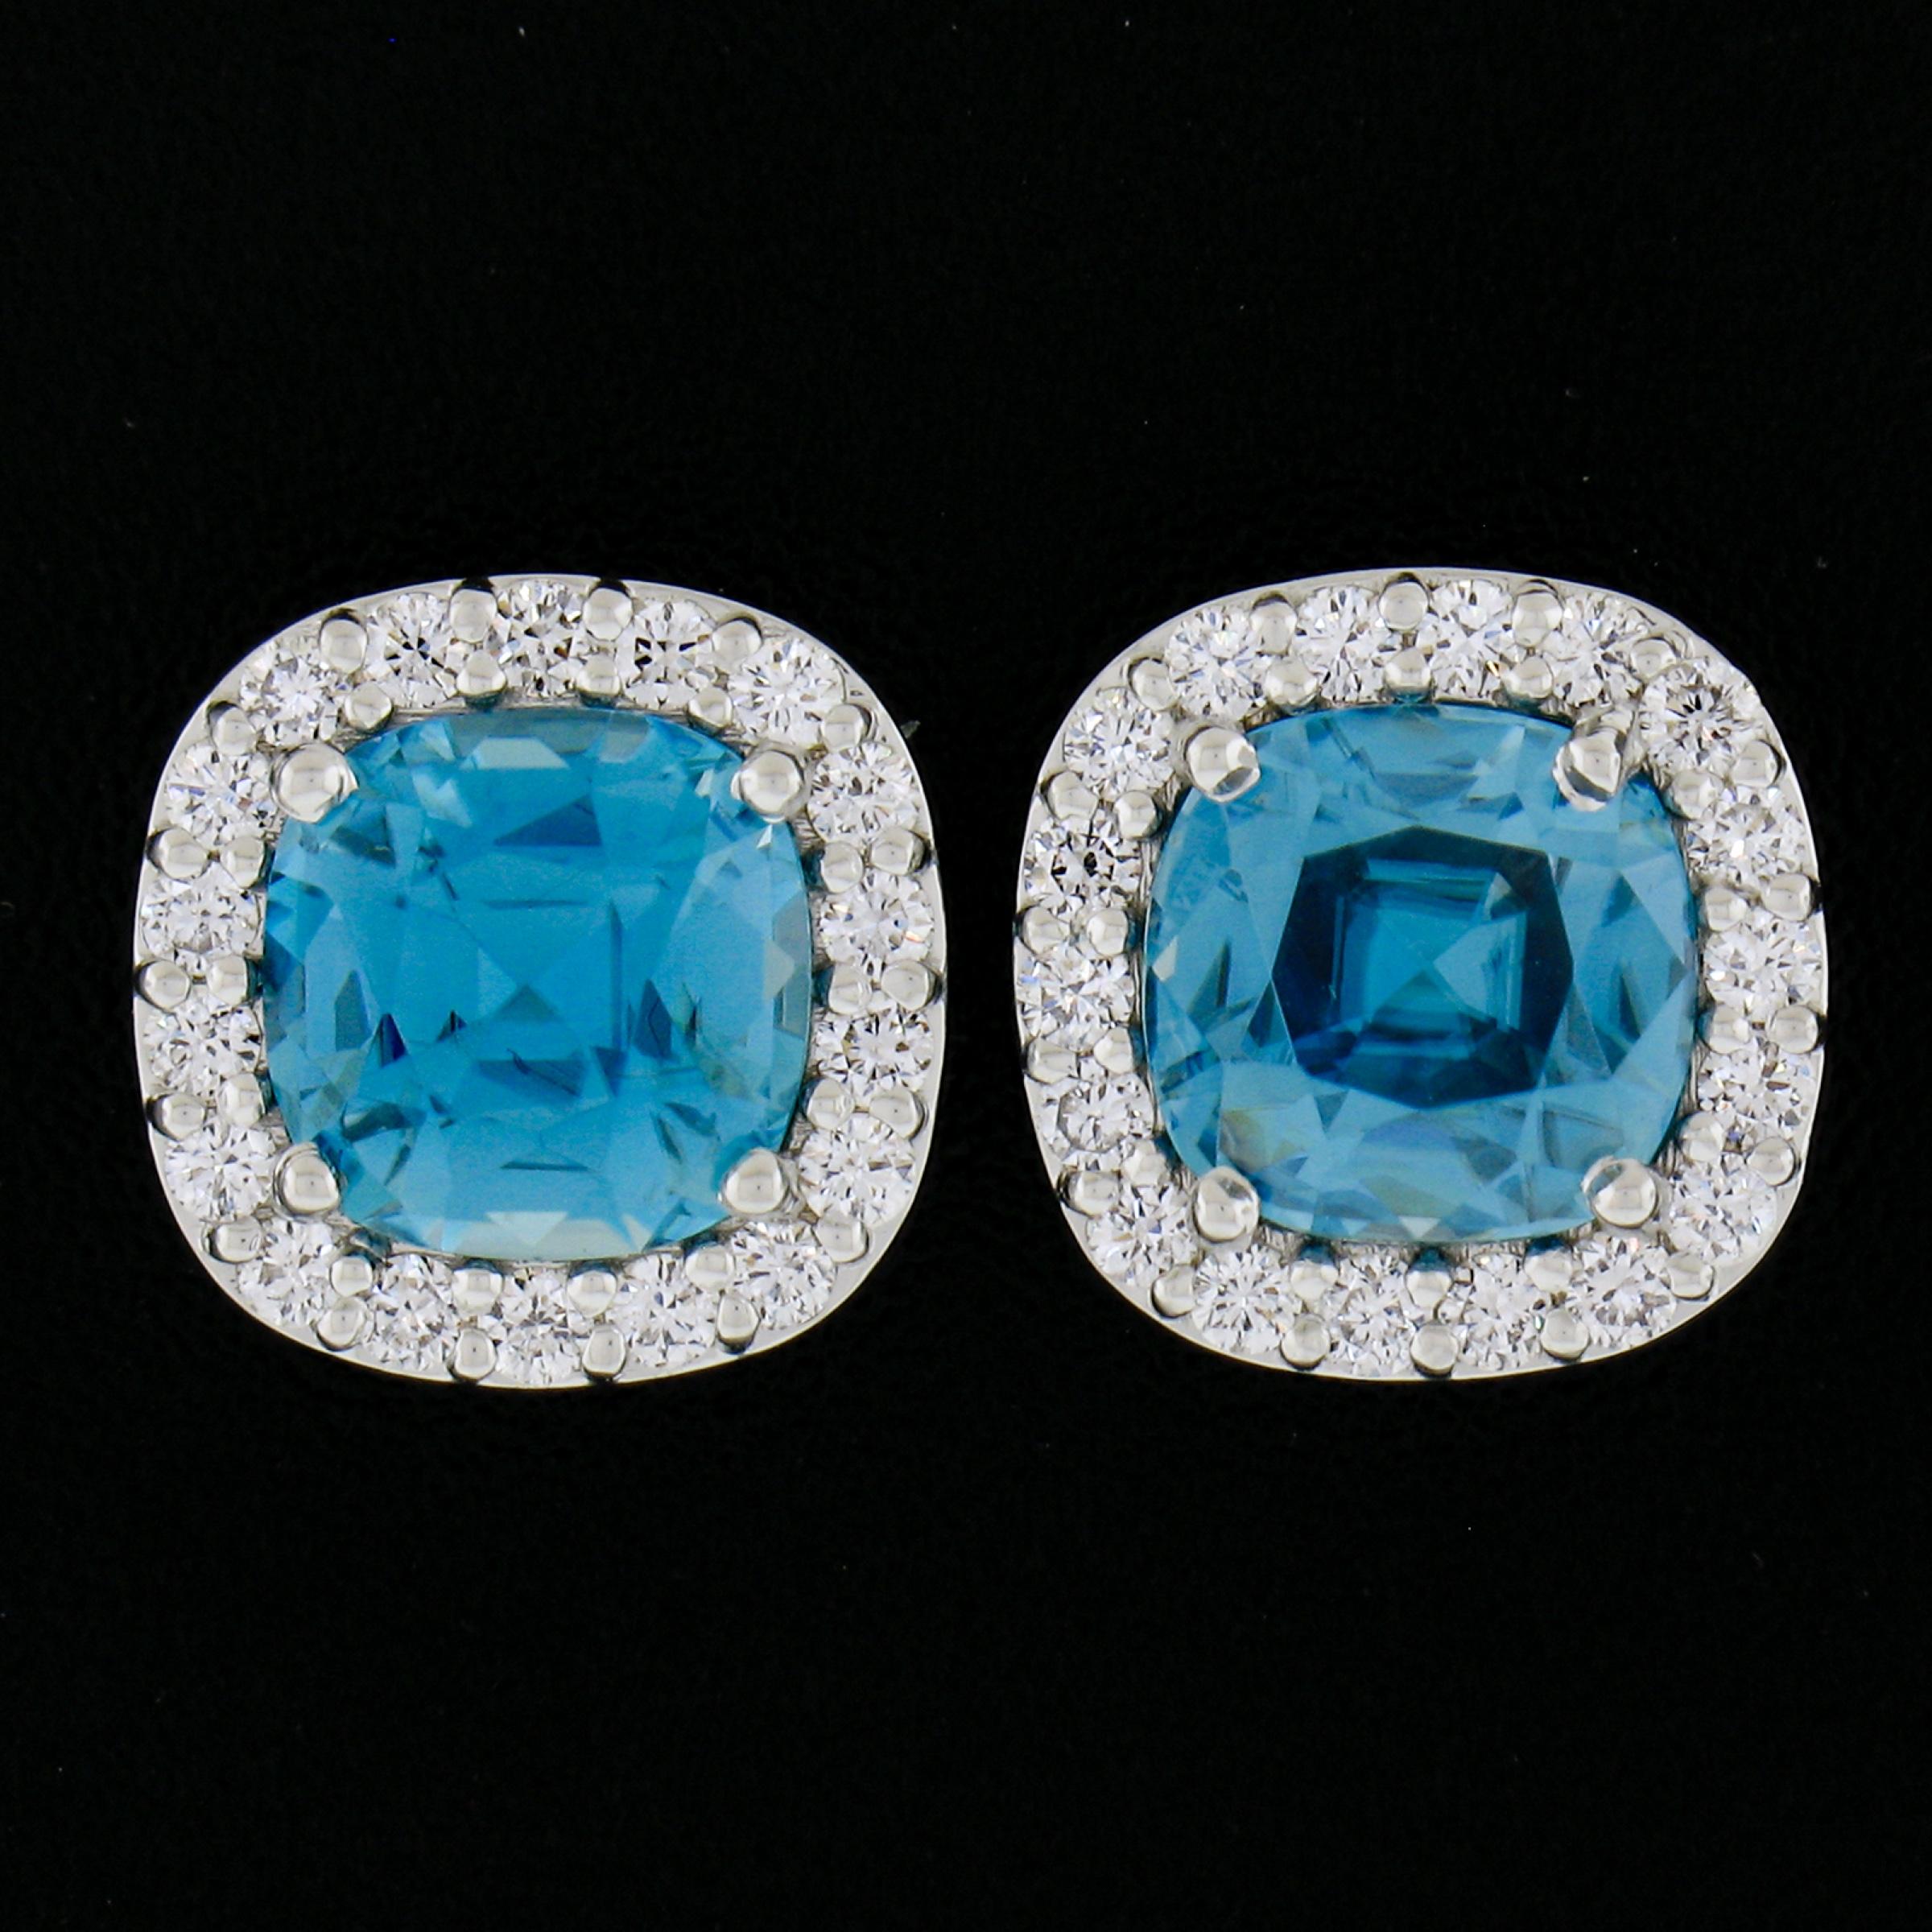 New 18k White Gold 5.61ctw Cushion Cut Blue Zircon & Diamond Halo Stud Earrings In New Condition For Sale In Montclair, NJ